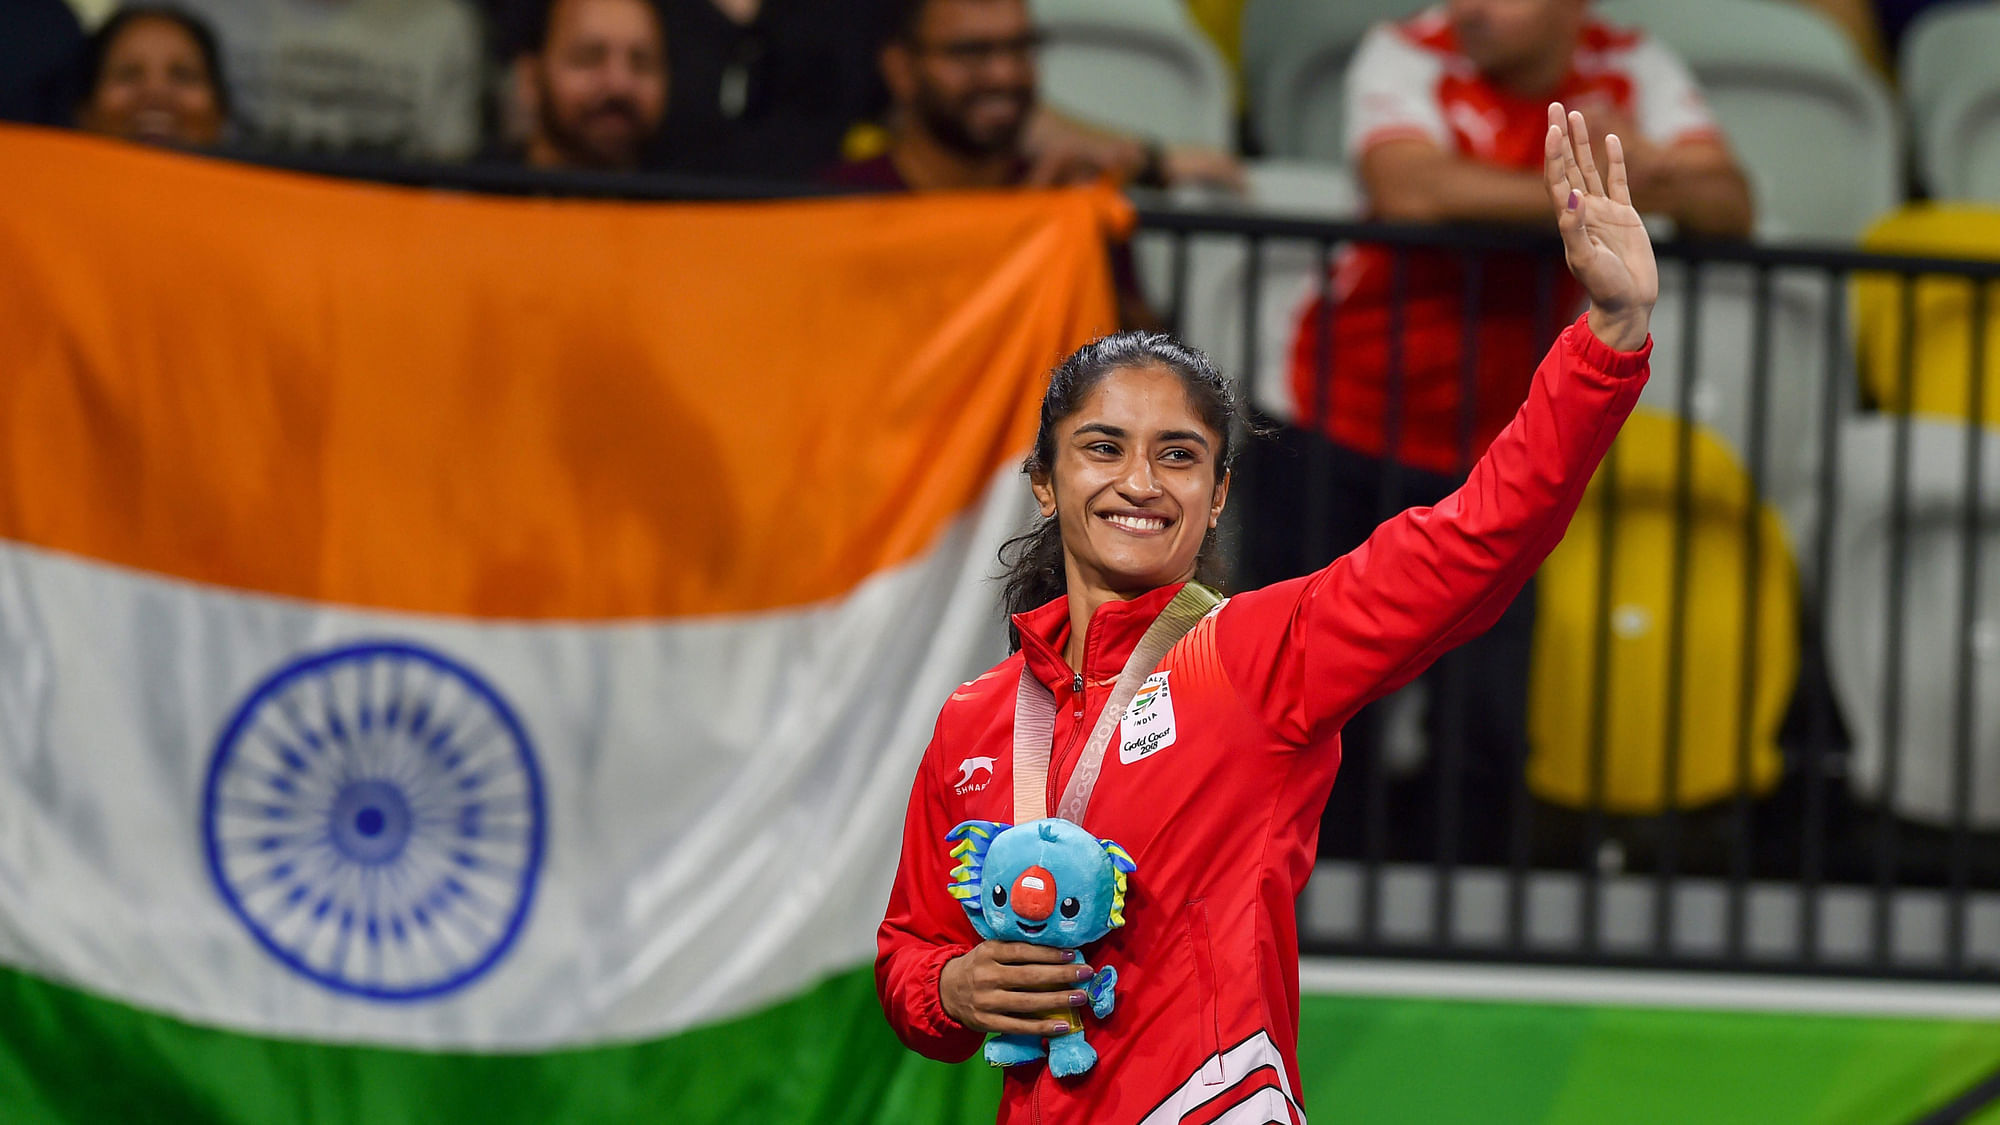 Vinesh Phogat won a gold medal at the 2018 Commonwealth Games.